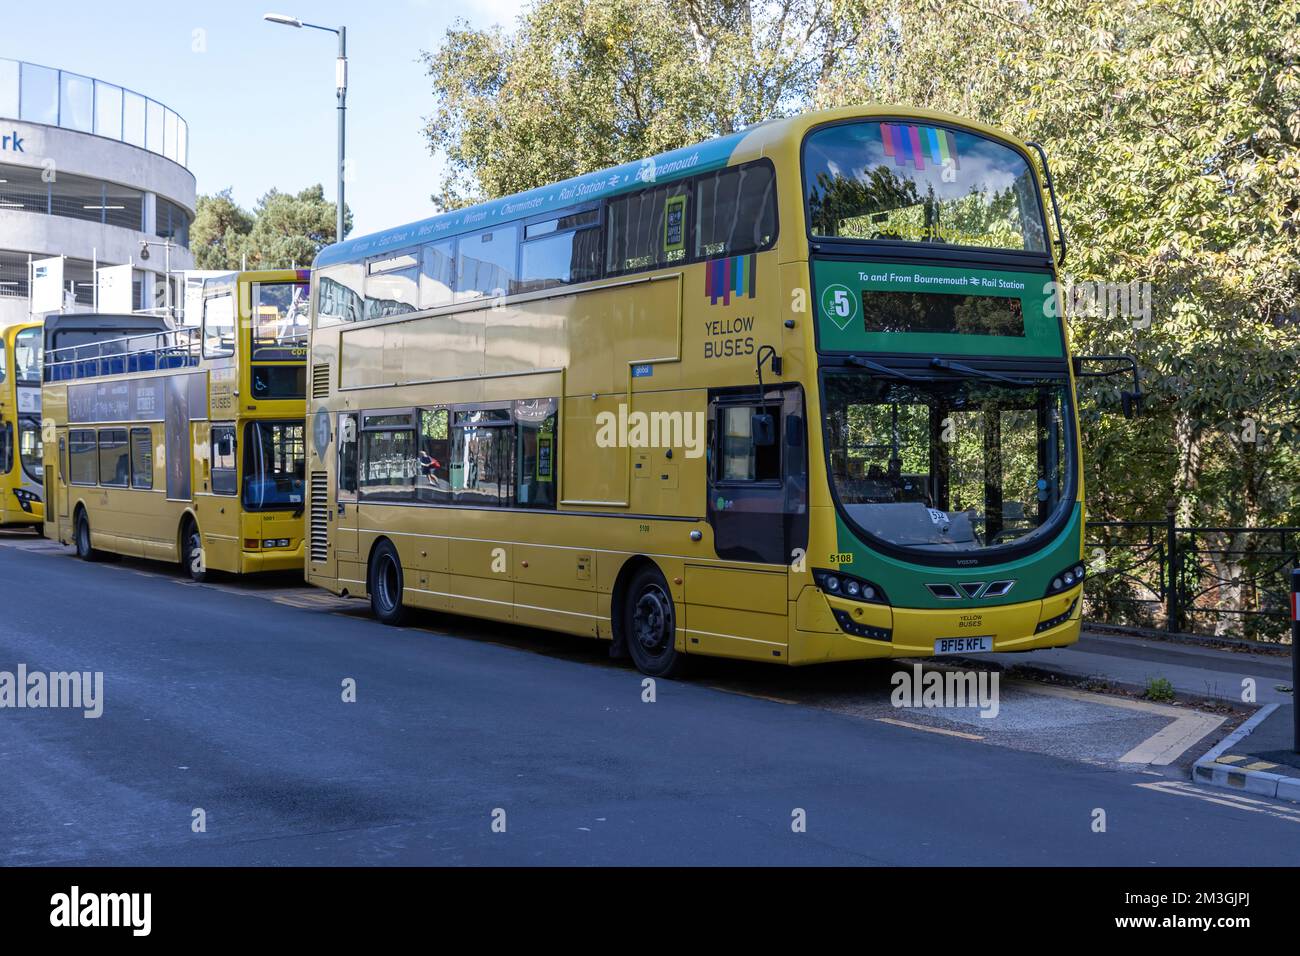 Bournemouth, UK, September 29, 2021: A 2015 Volvo B5TL, Double Decker from the Yellow Buses Company, Reg No: BF15 KFL, in Bournemouth UK 29-09-2021 Stock Photo